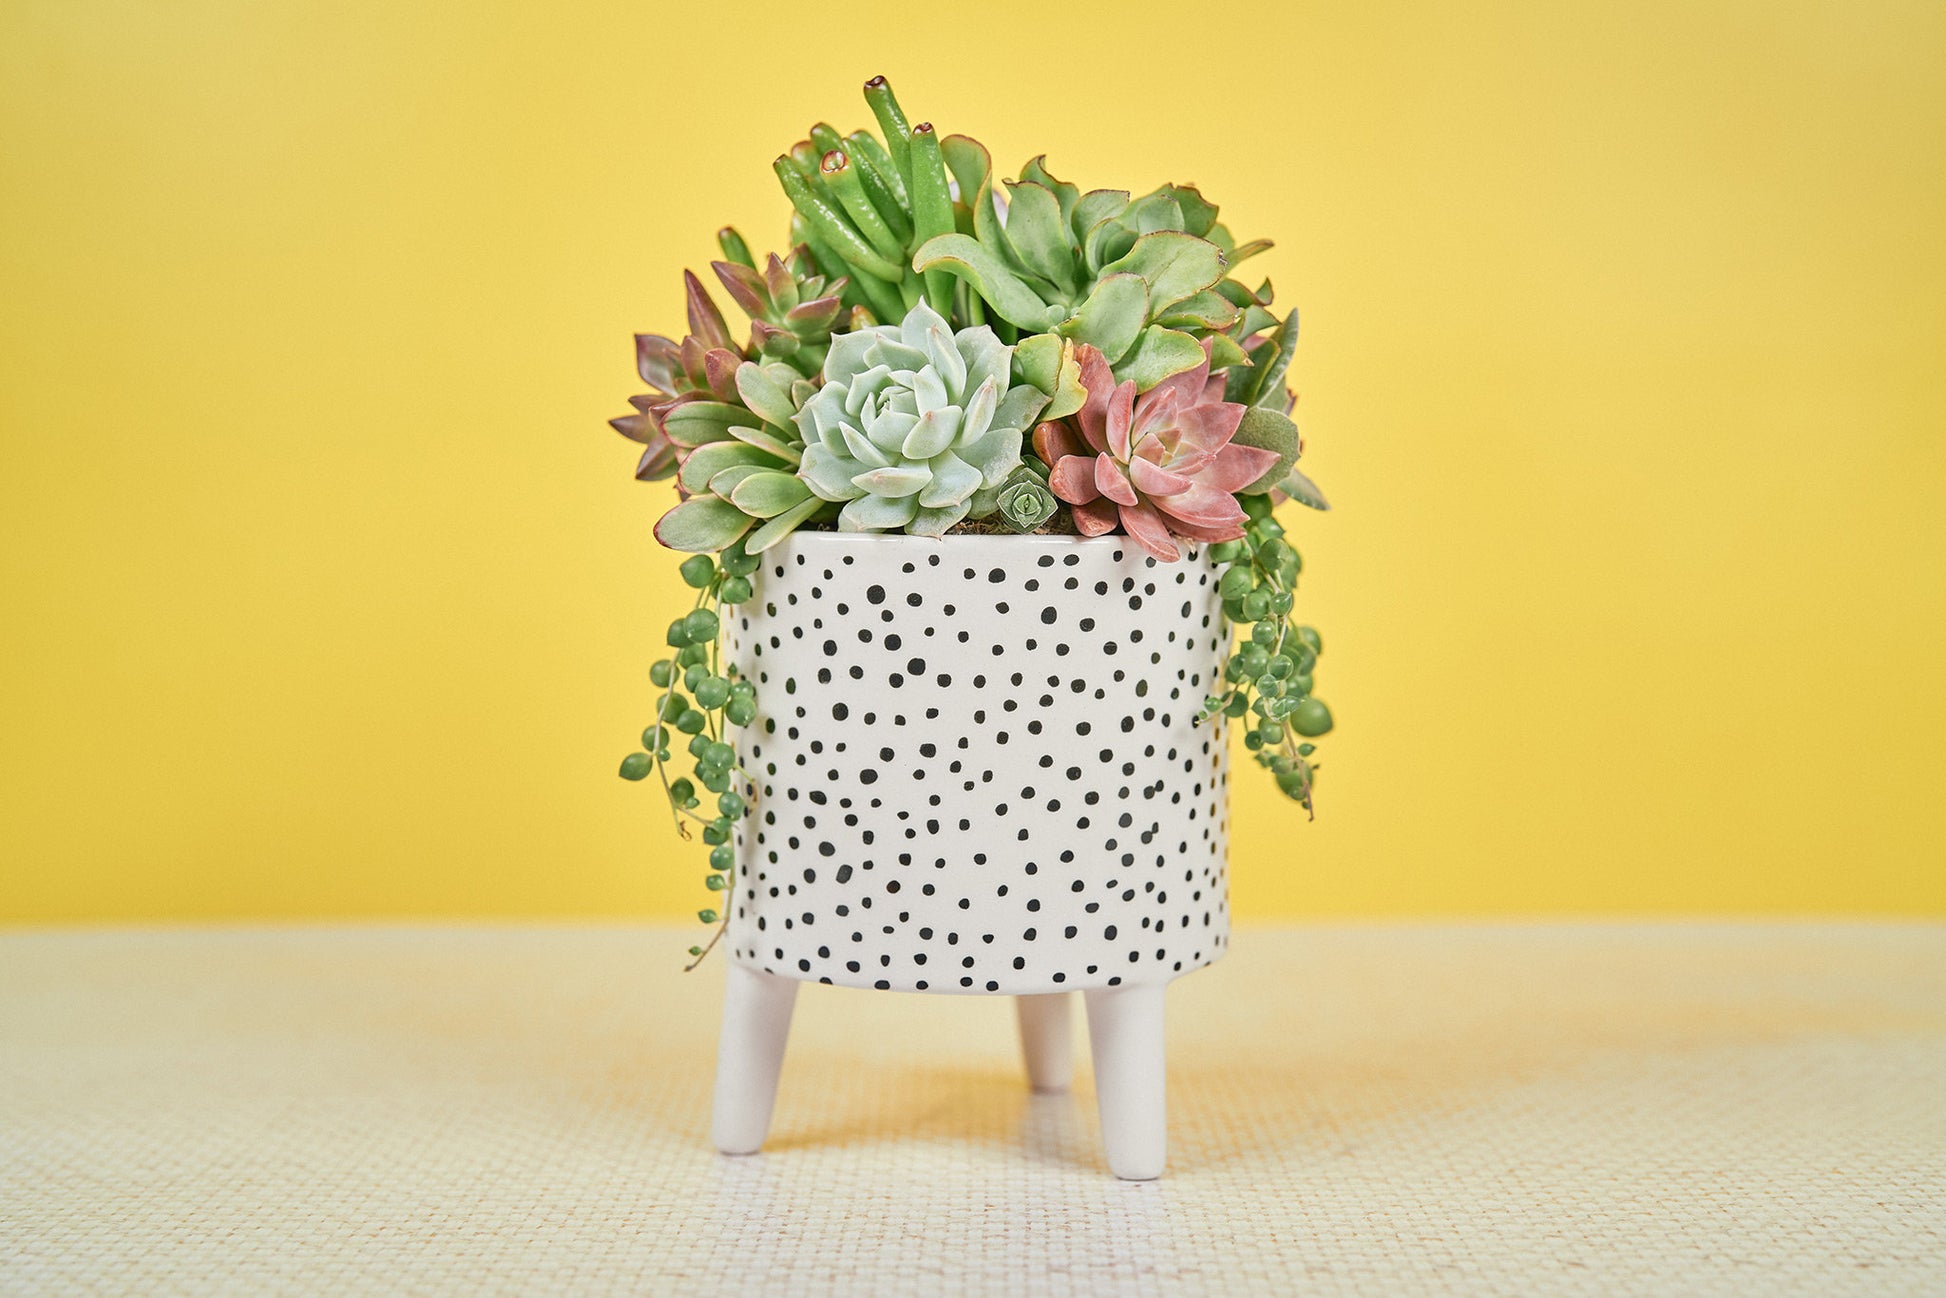 Spotty Footed Living Succulent Arrangement Gift | Birthday, Celebration, Sympathy, House Warming Living Gift for Plant Lovers